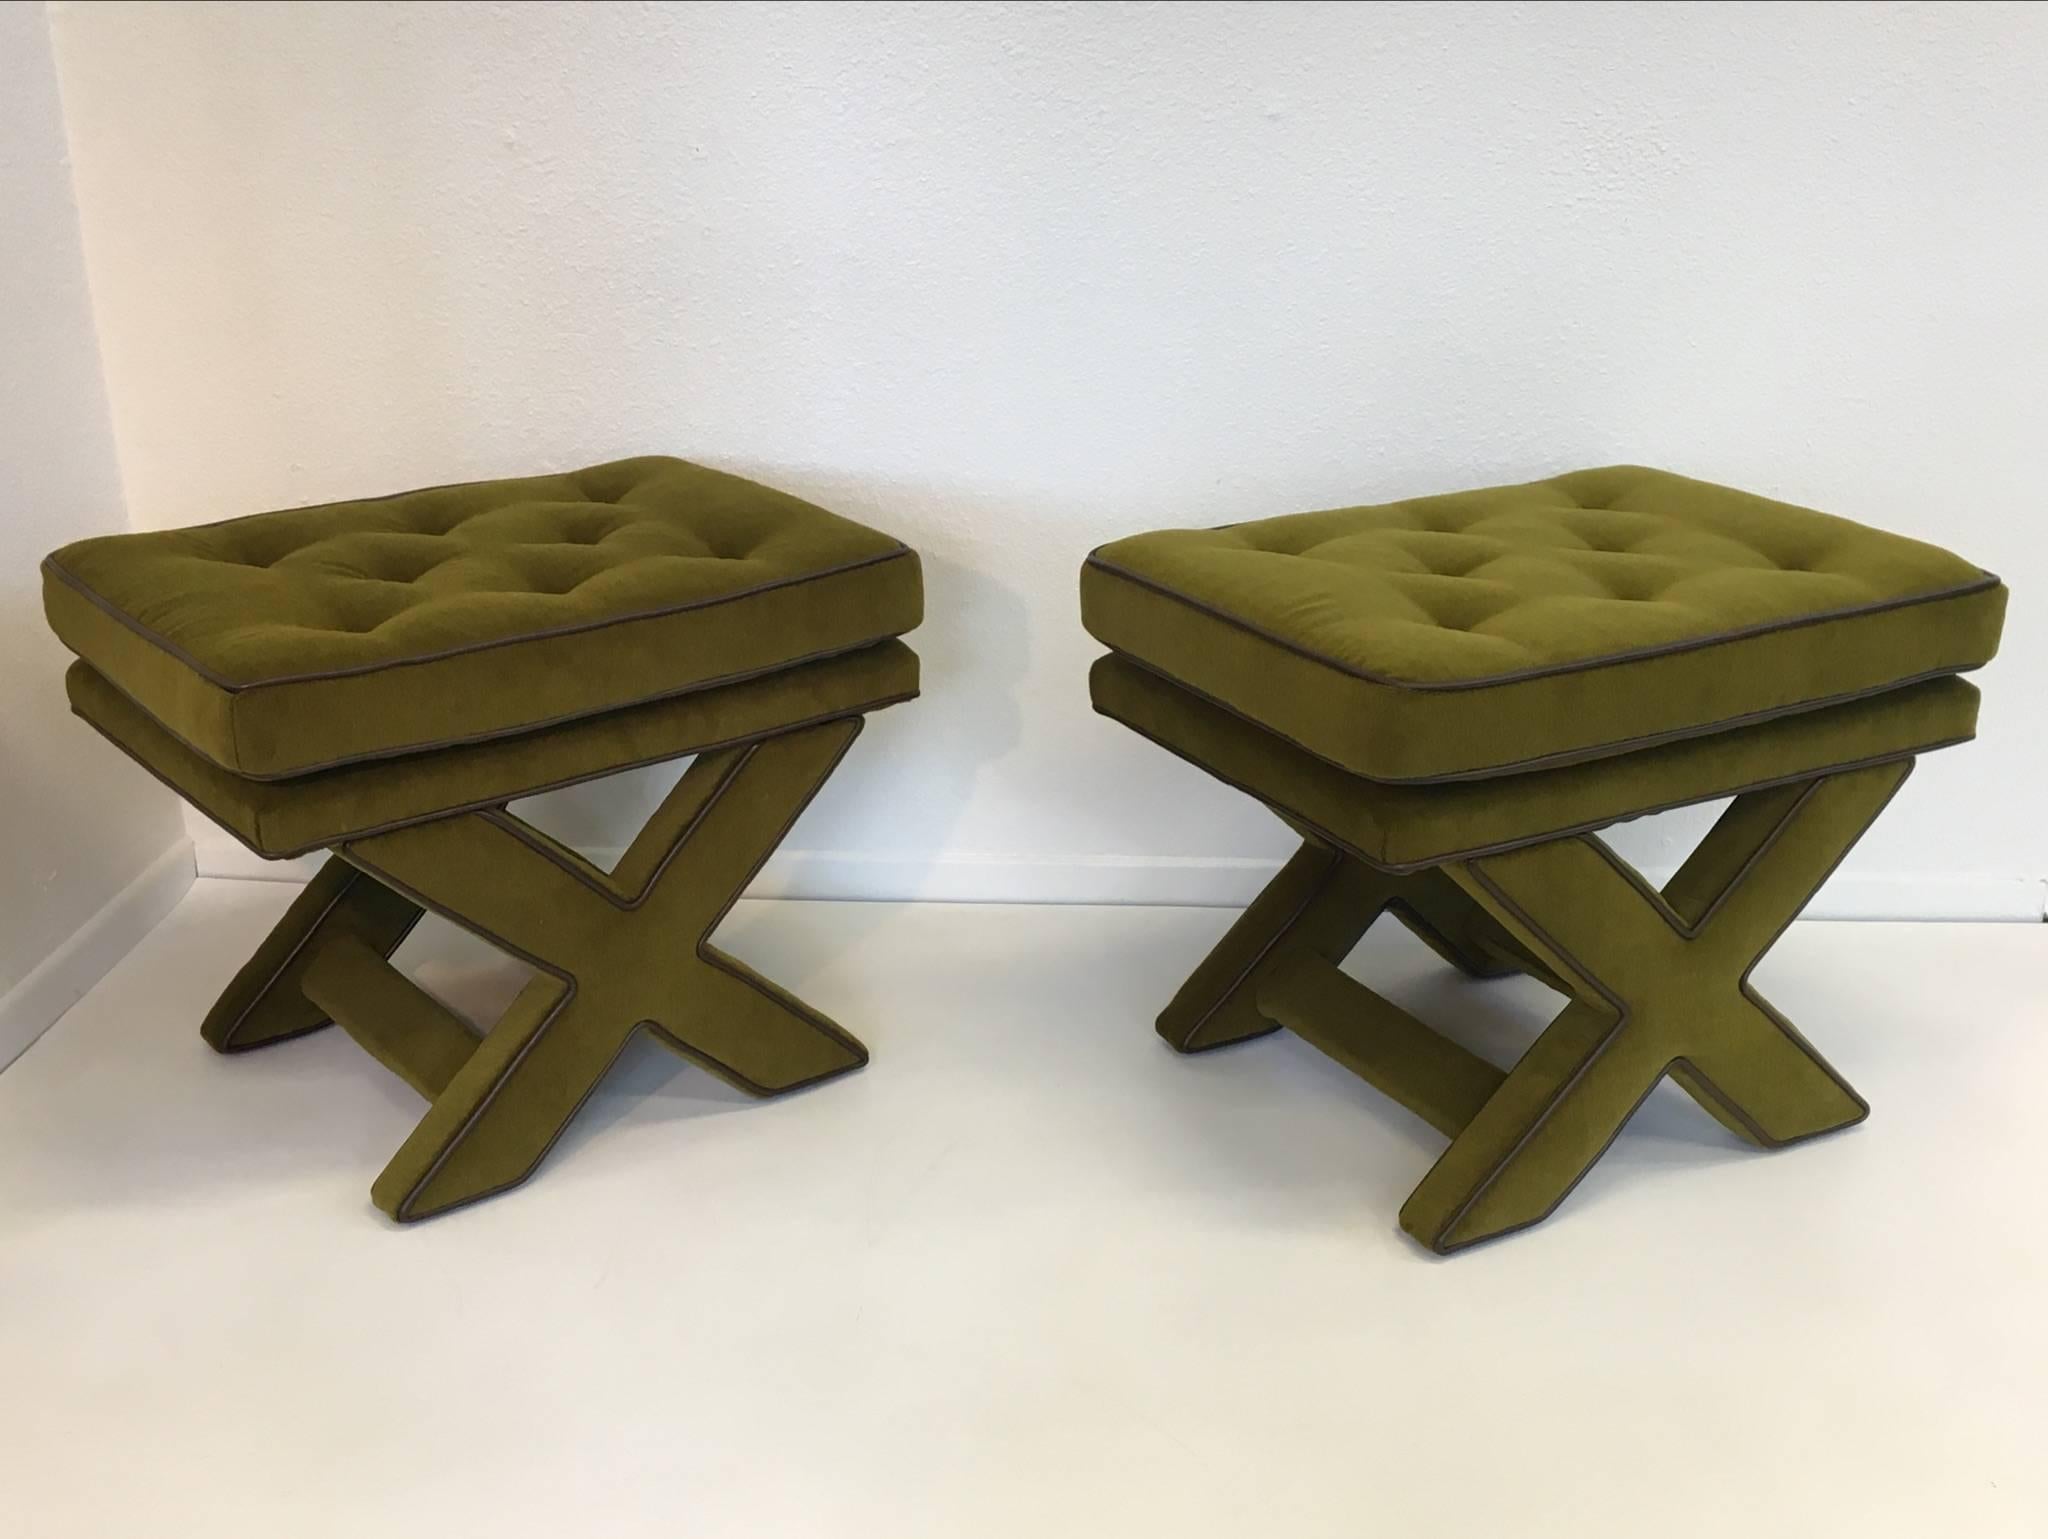 An amazing pair of "X" base benches by Designer Billy Baldwin from the 1970s.
Newly reupholstered in a soft olive green mohair with a dark brown trim.

Dimensions: 20" high, 26" wide, 19.50" deep.
  